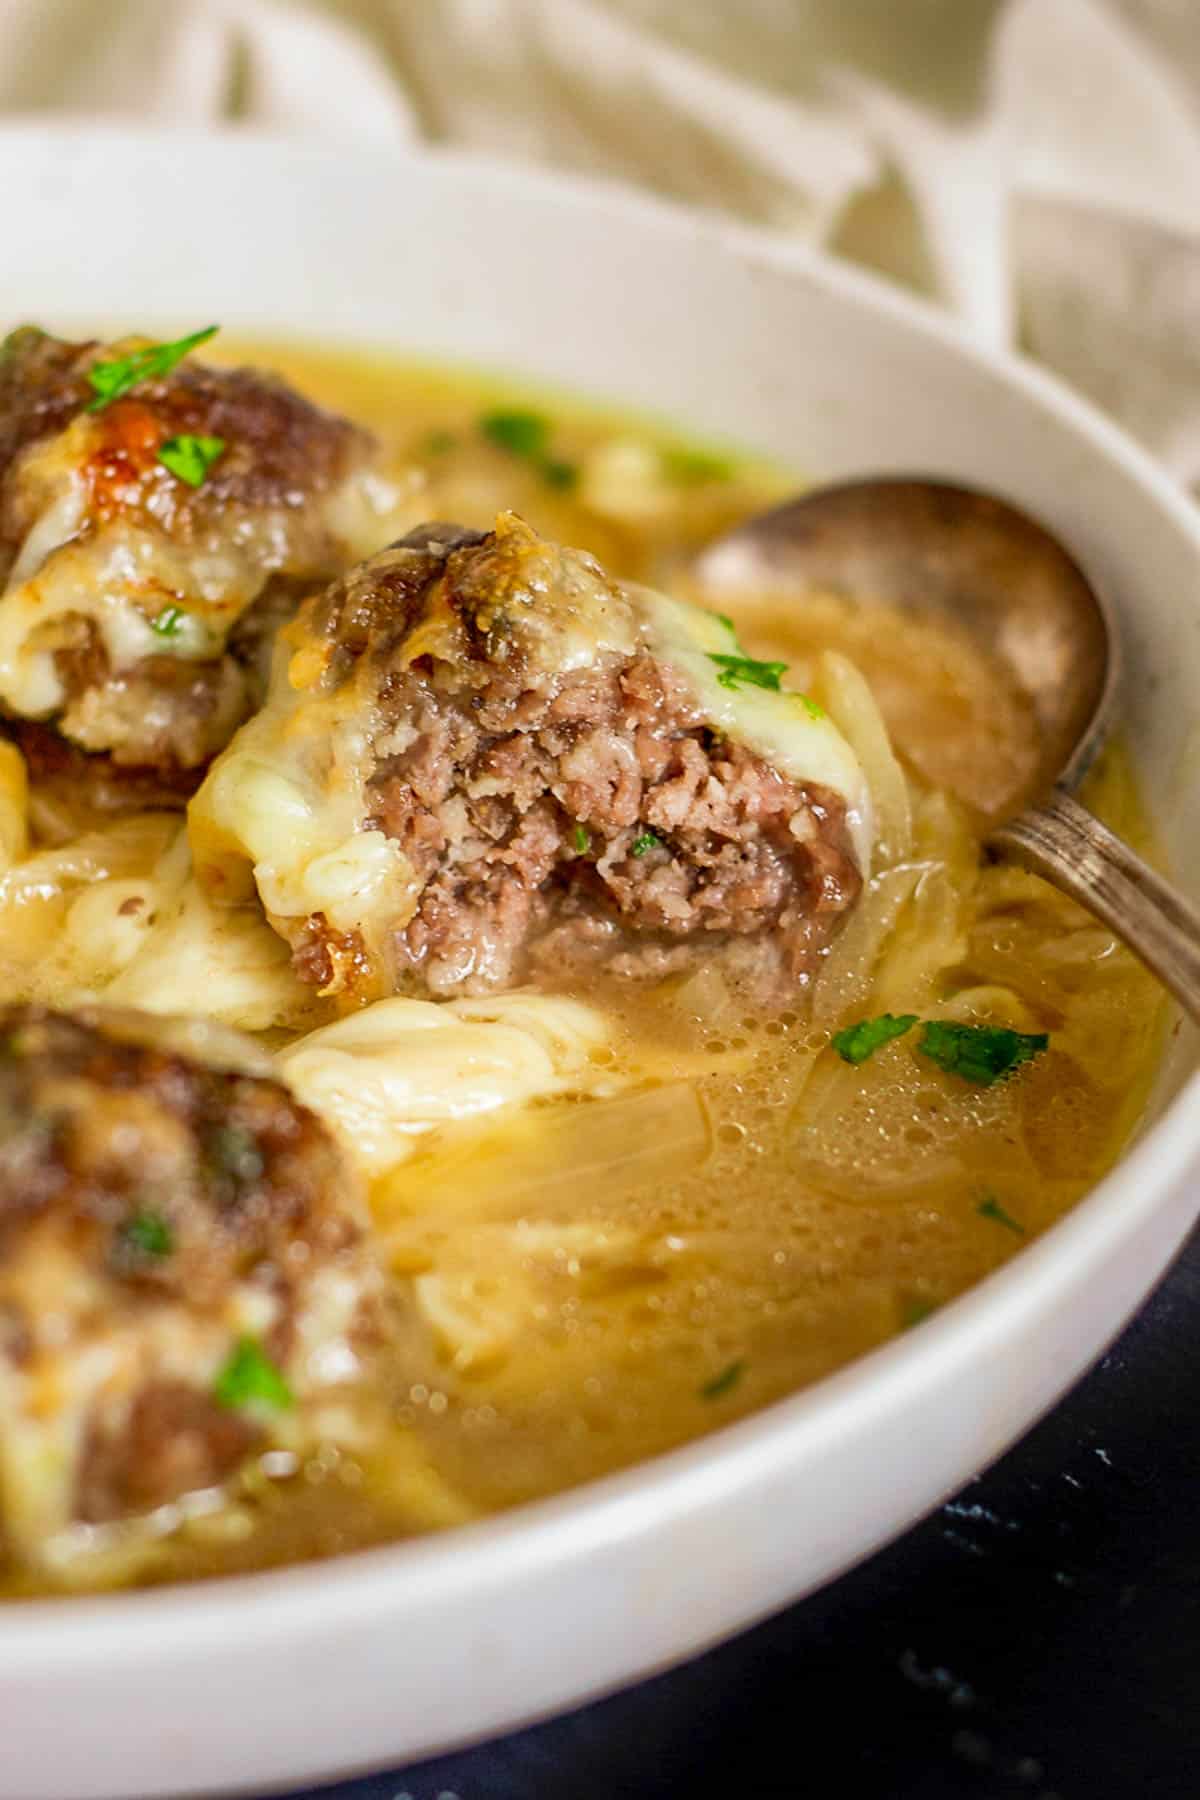 A cheese-topped meatball in a bowl of soup.